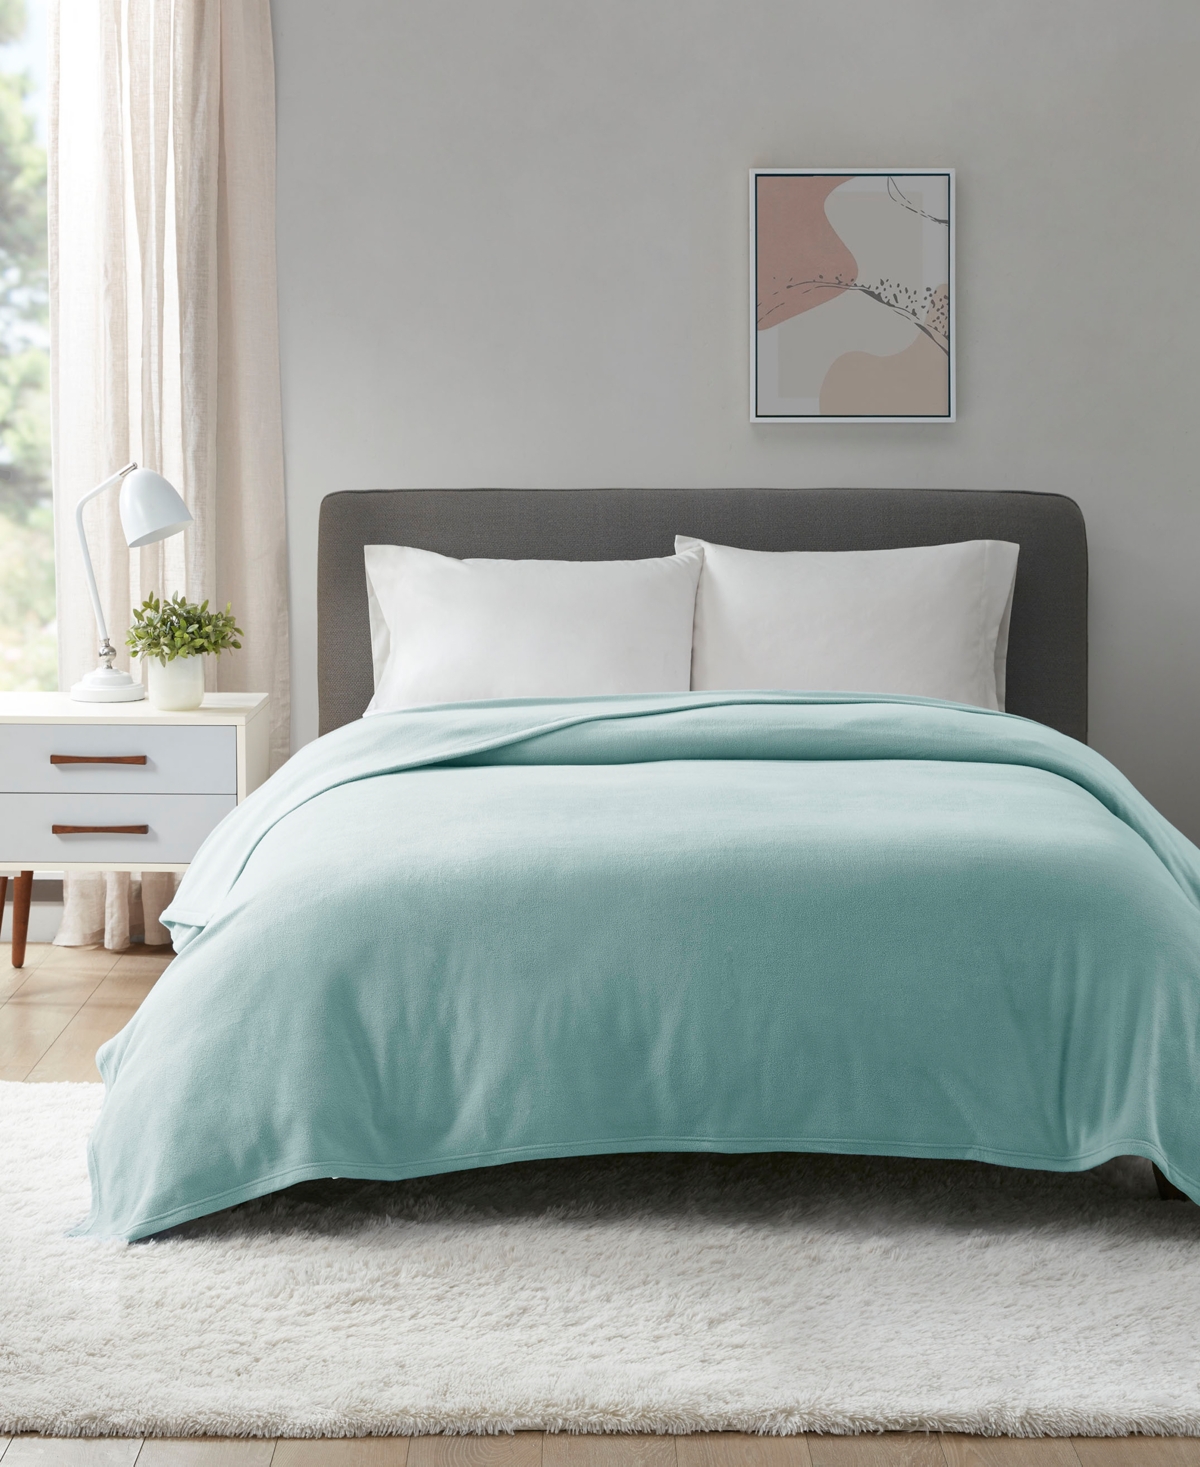 Home Design Easy Care Year-round Soft Fleece Blanket, King, Created For Macy's In Mint